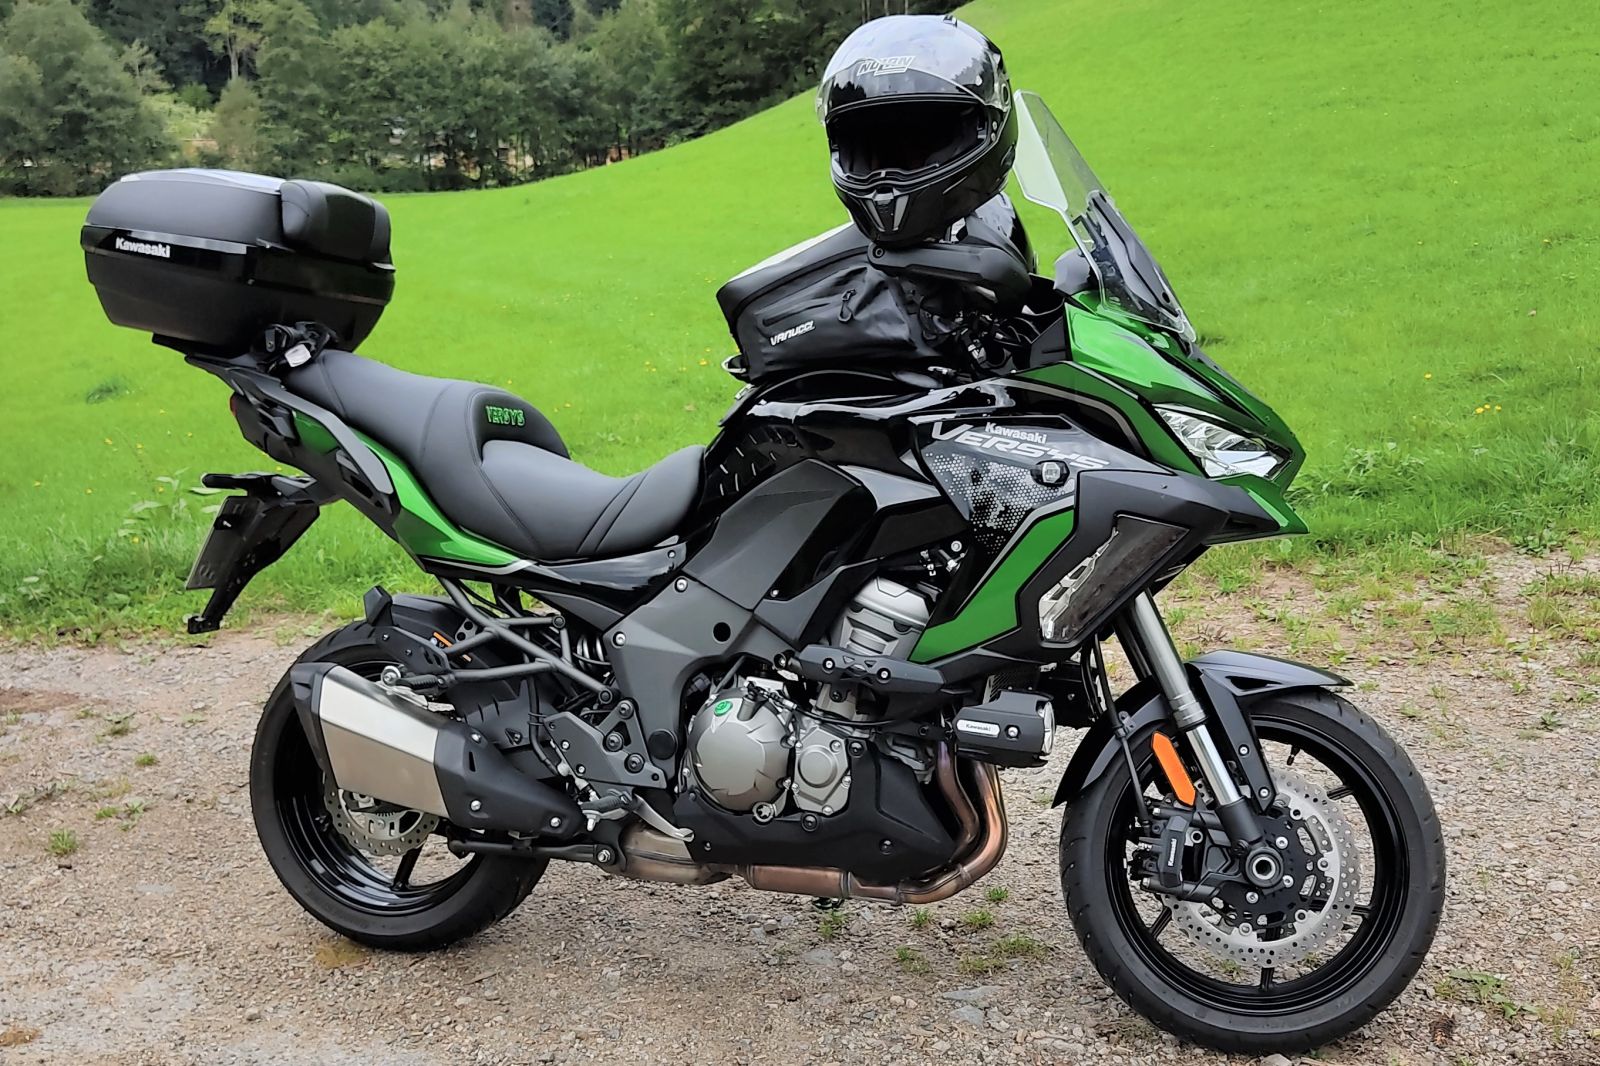 KAWASAKI VERSYS 1000 [>= 2019] - Deluxe petrol tank covers, [Rates for: GERMANY]